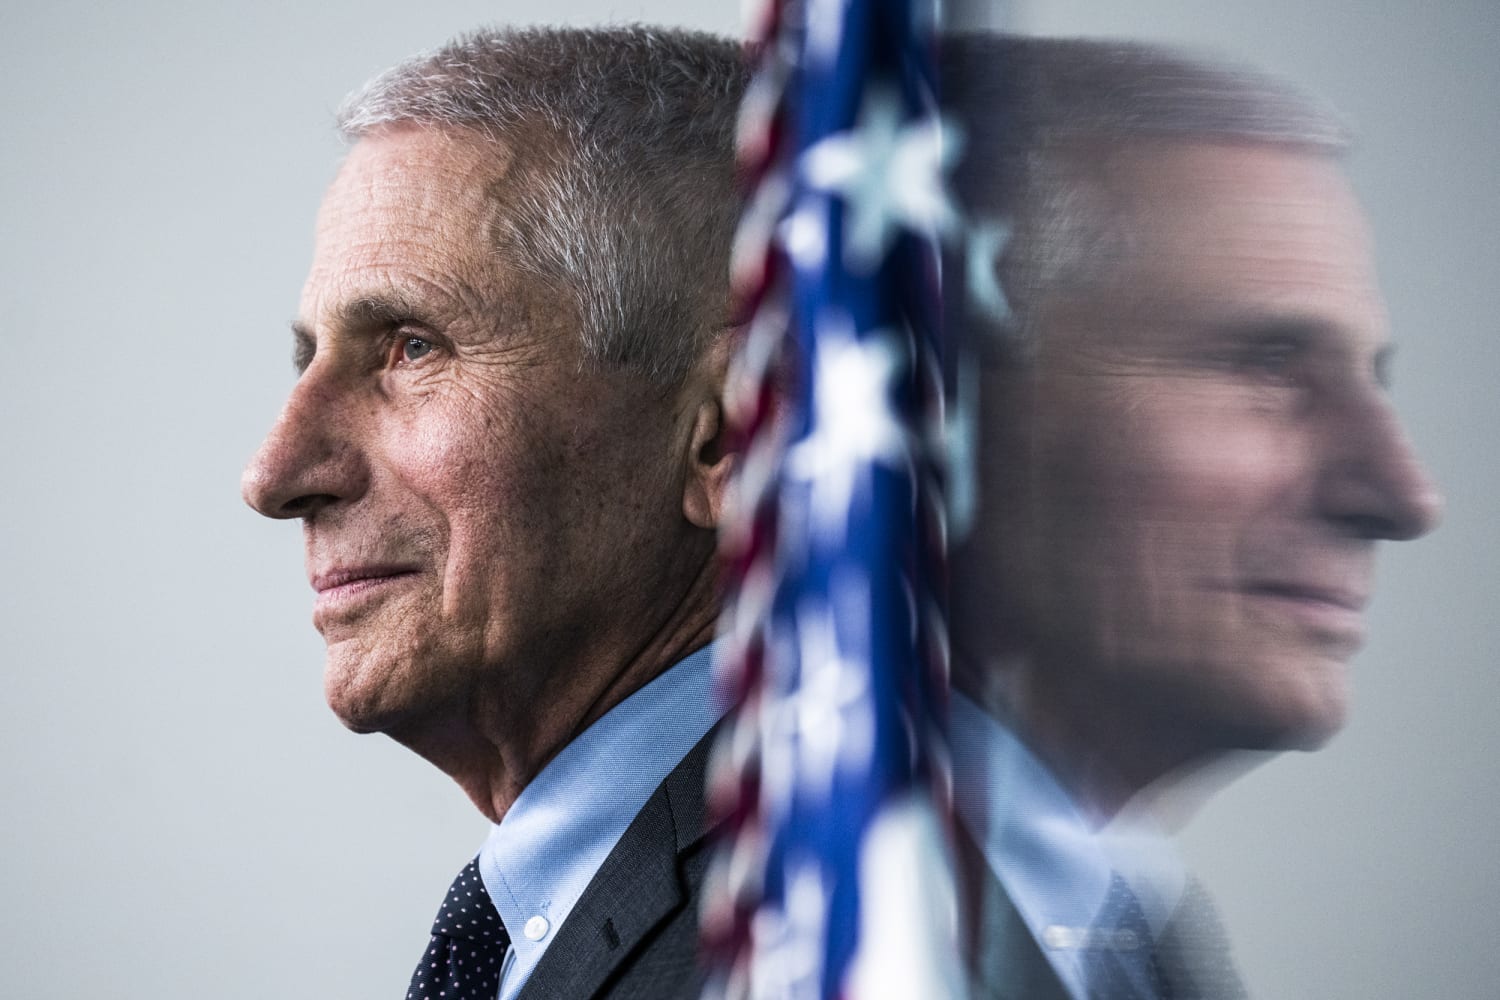 Fauci criticizes 'extreme' ideological divide that has led to disproportionate Covid deaths